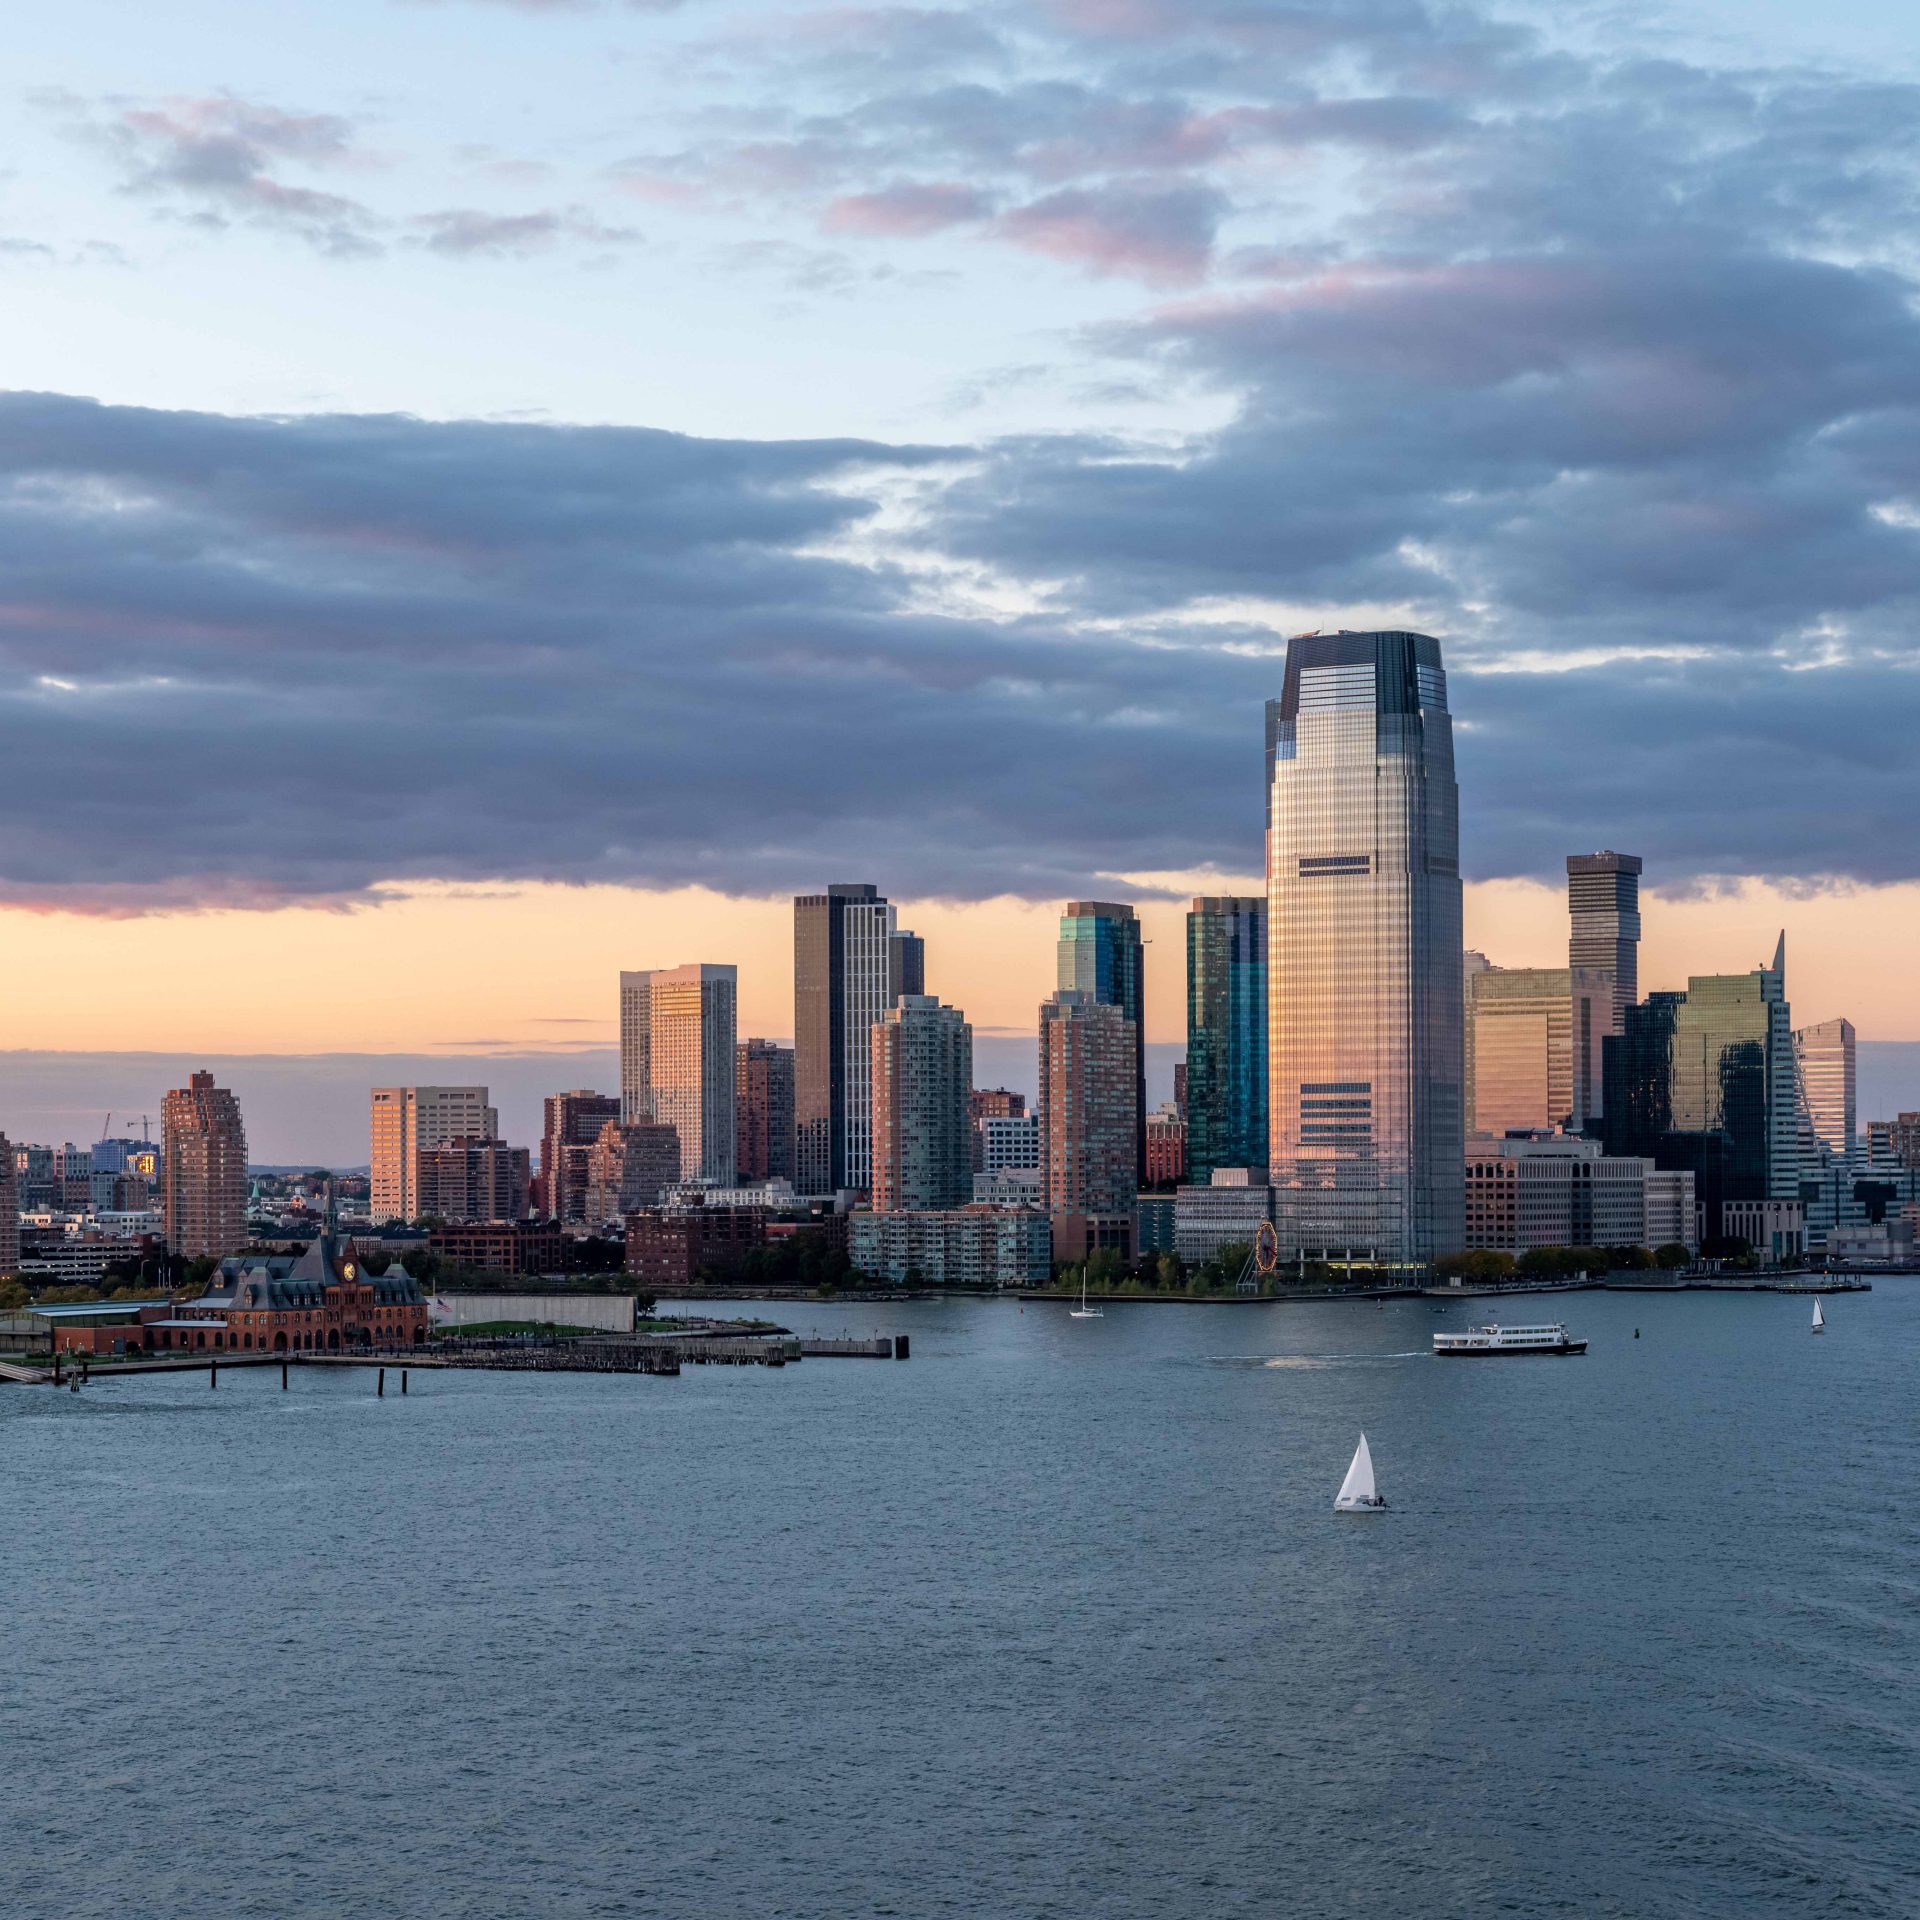 The picture shows the skyline of New Jersey.